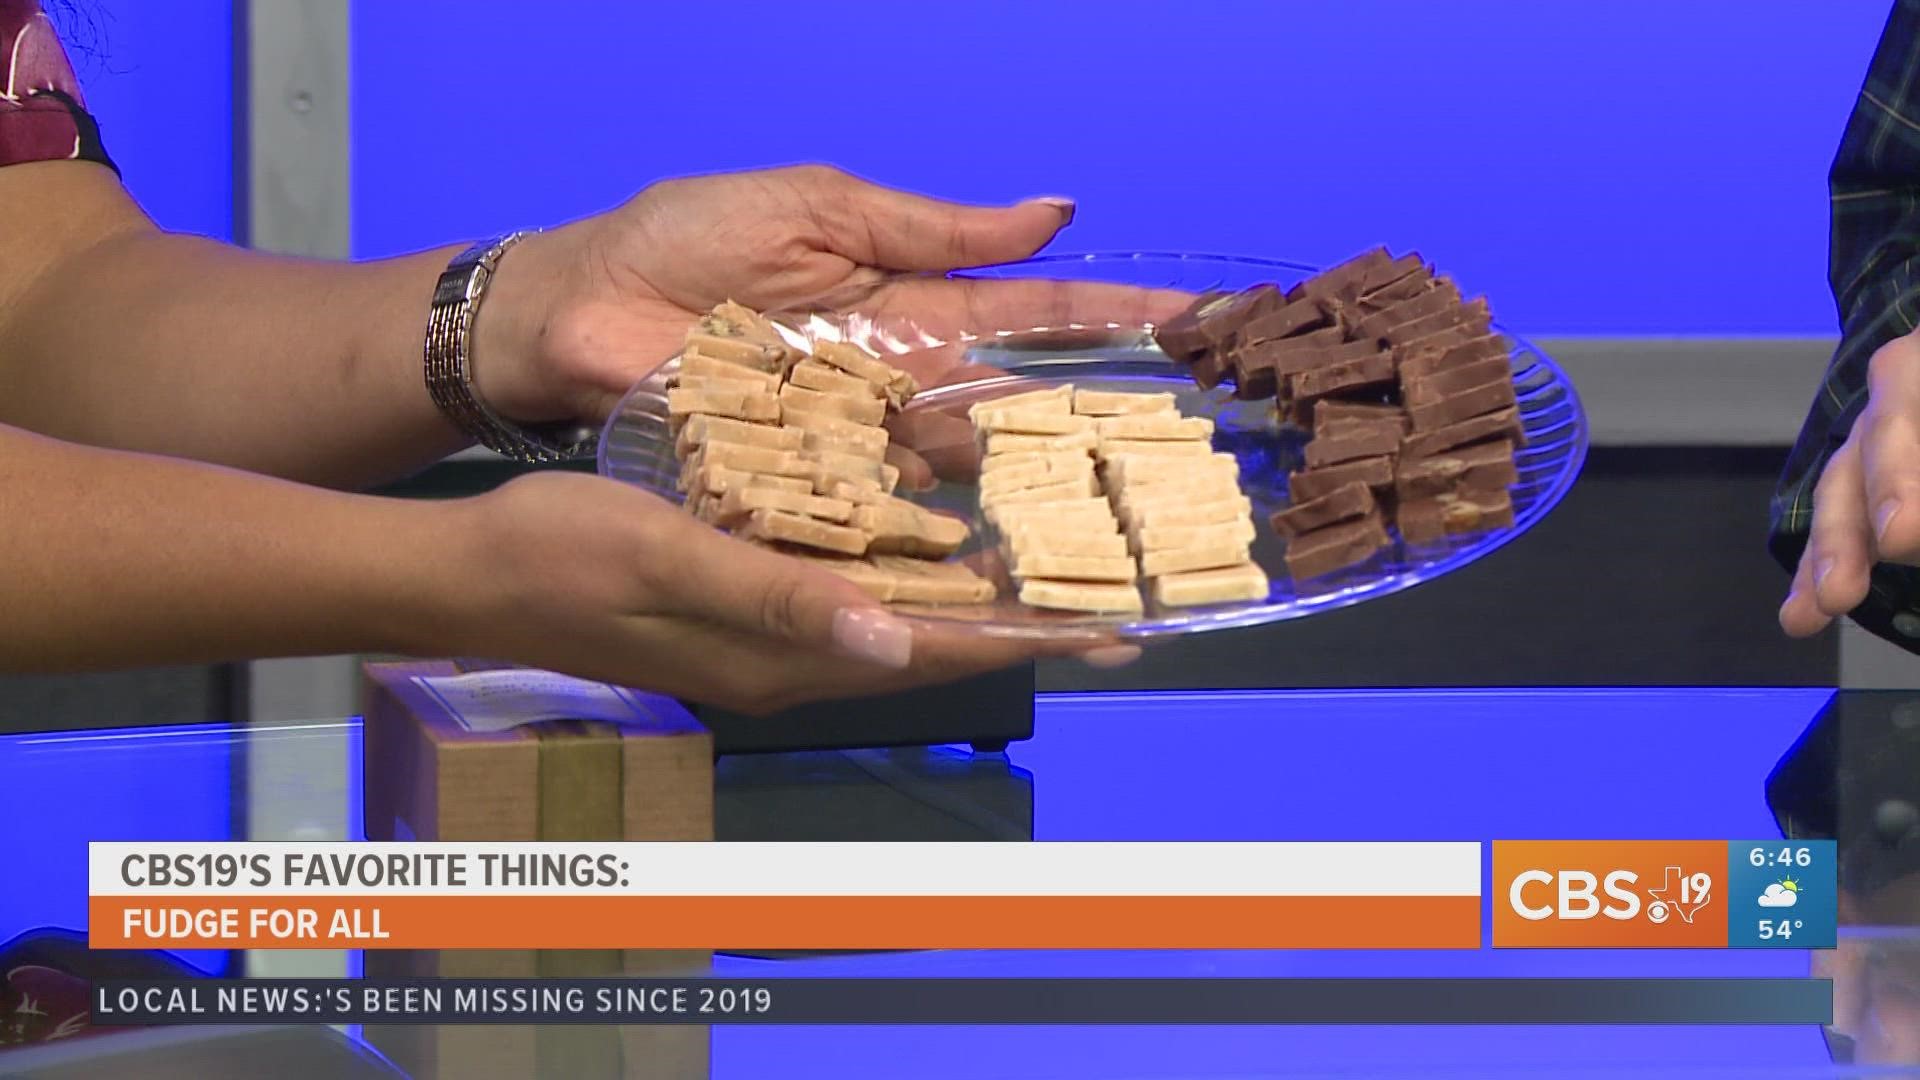 CBS19 is celebrating East Texas this holiday season with a list of our favorite things! Today’s item is fudge bars from Fudge for All.